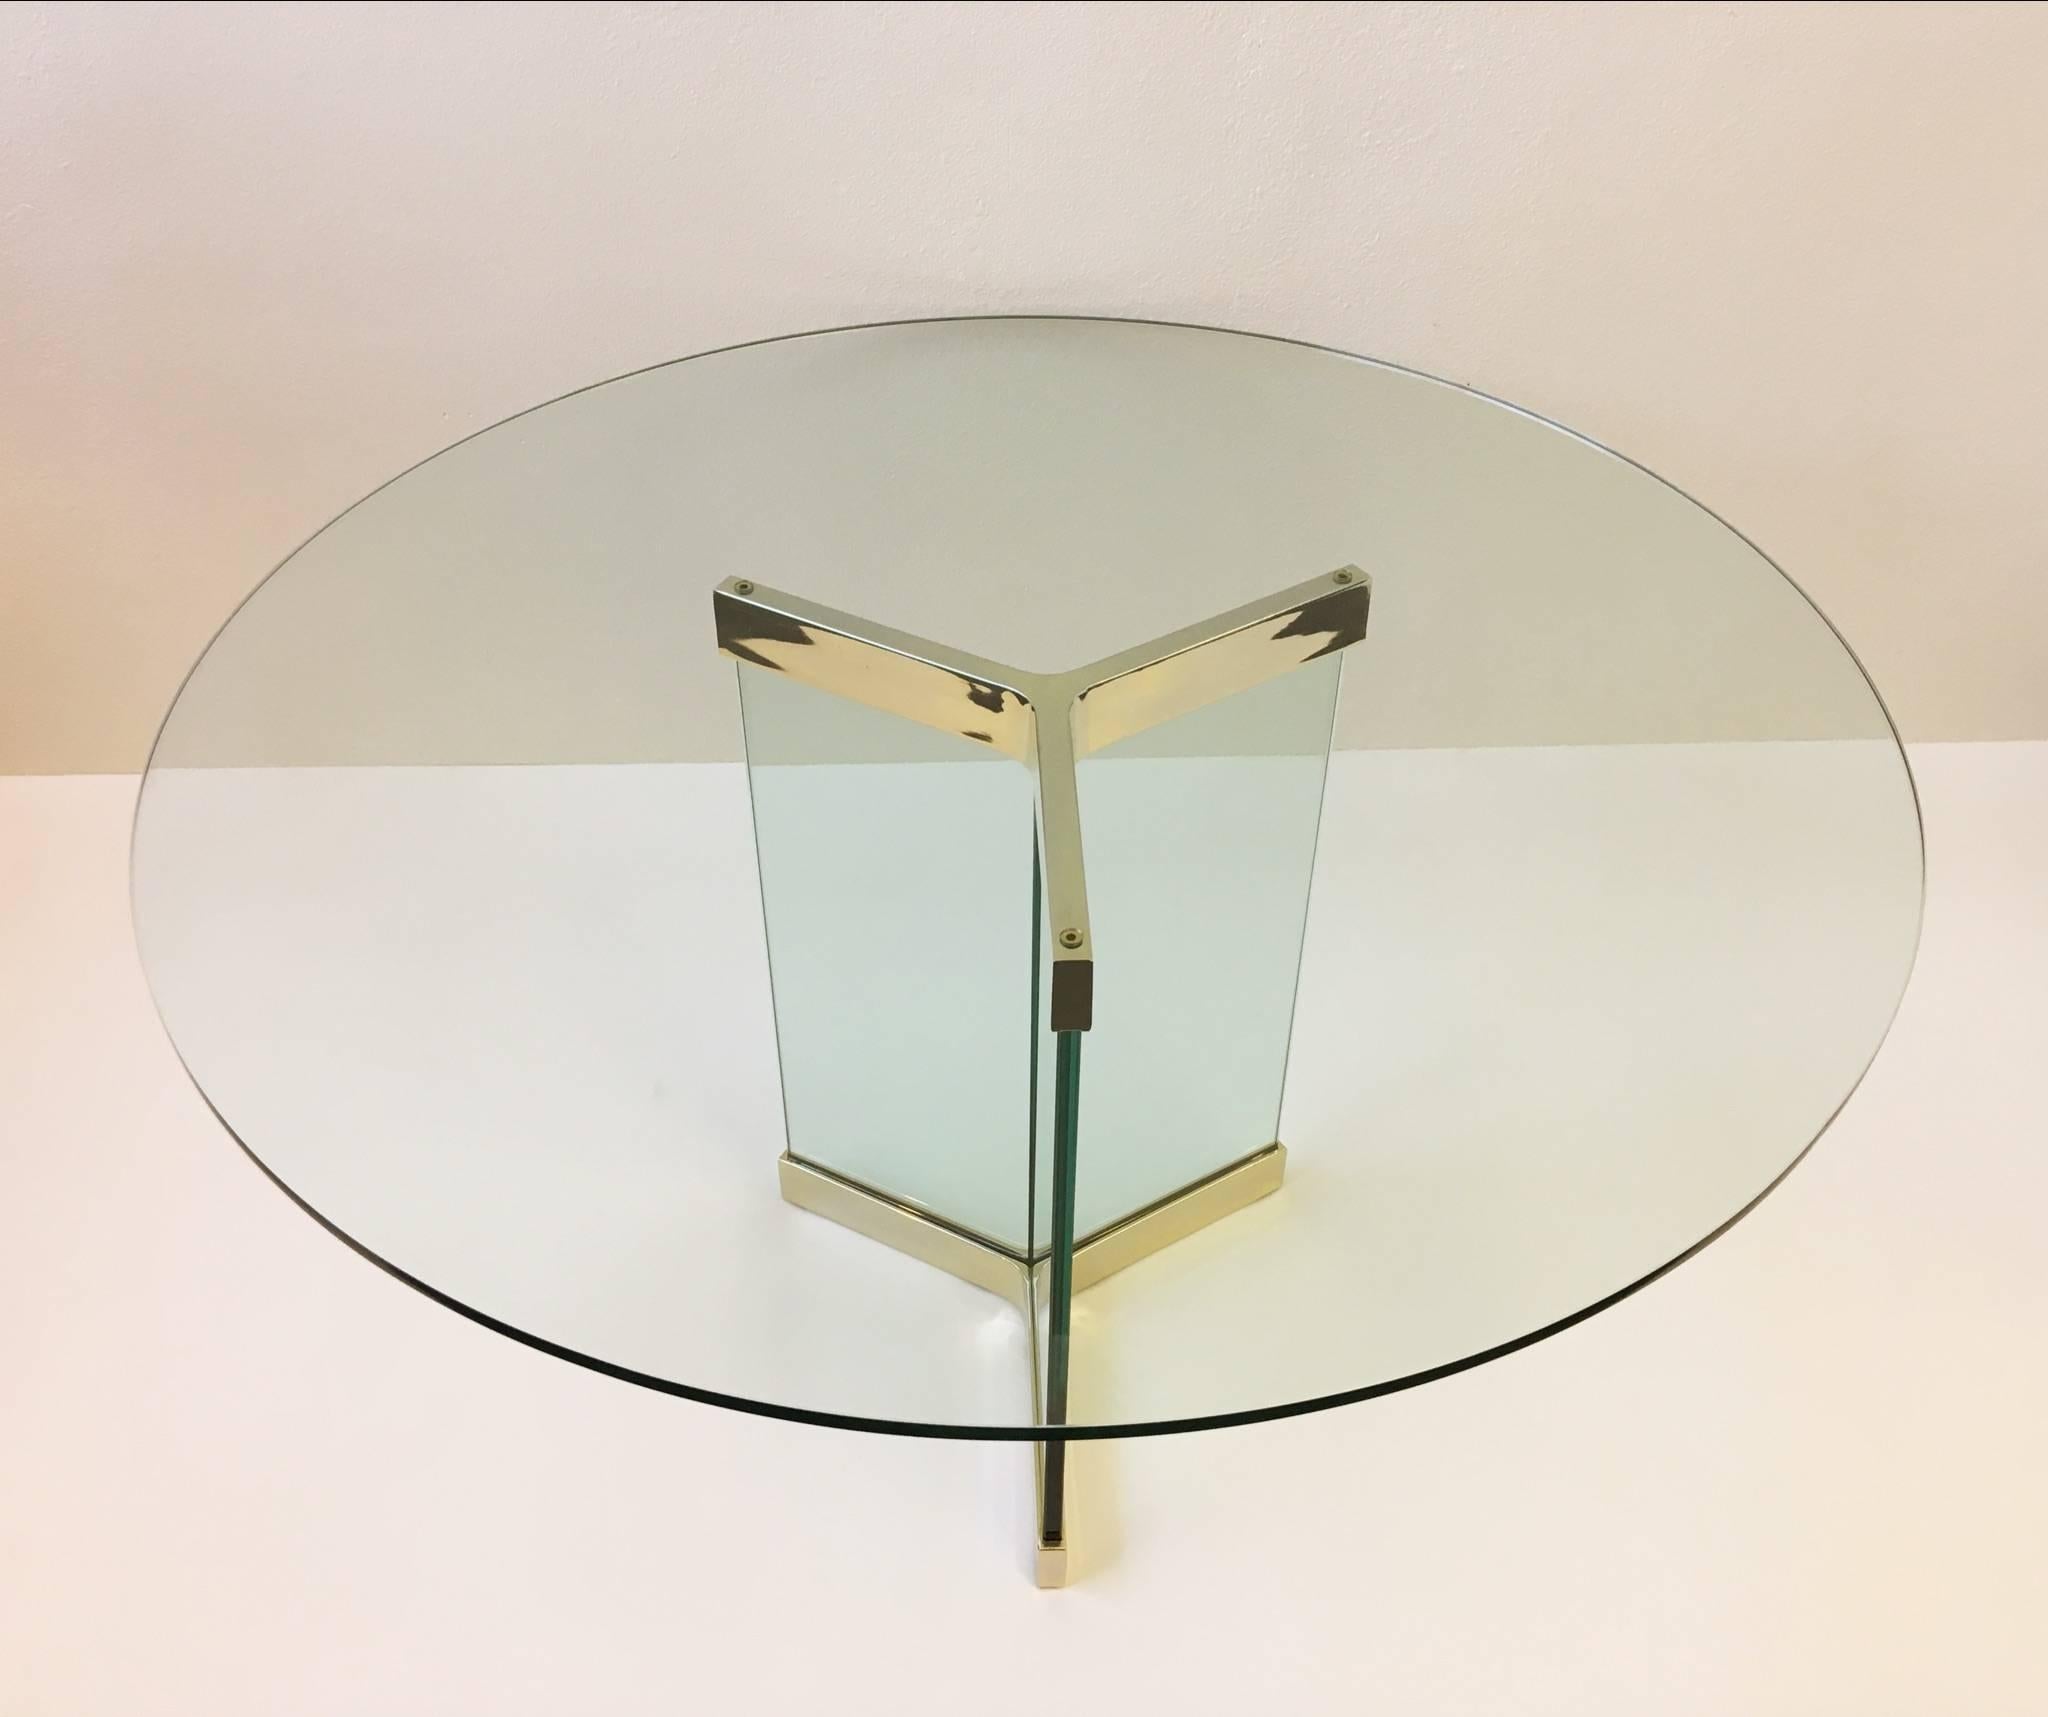 A polished brass and glass round dining table designed in the 1970s by Leon Rosen for Pace Collection.
Measures: New 48